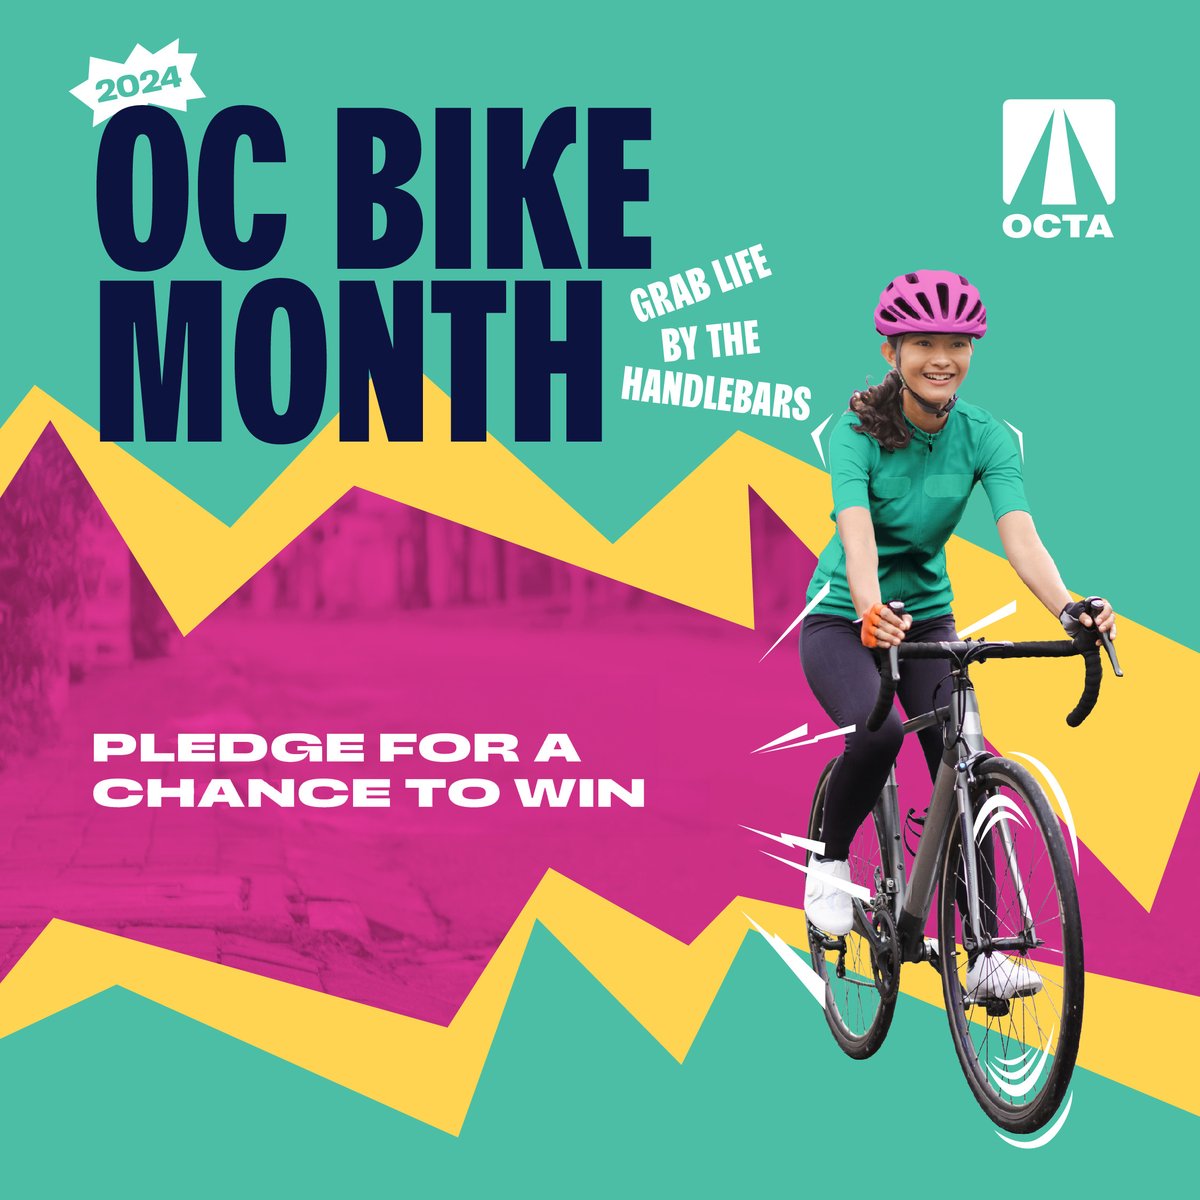 𝐈𝐭'𝐬 𝐁𝐢𝐤𝐞 𝐌𝐨𝐧𝐭𝐡! Did you know #OrangeCounty is home to more than 1,000 miles of bikeways and scenic trails? Pledge to ride a #bike one or more times this month for a chance to win an Ebike (no purchase or payment necessary). We also hope you'll join us for a four-mile…